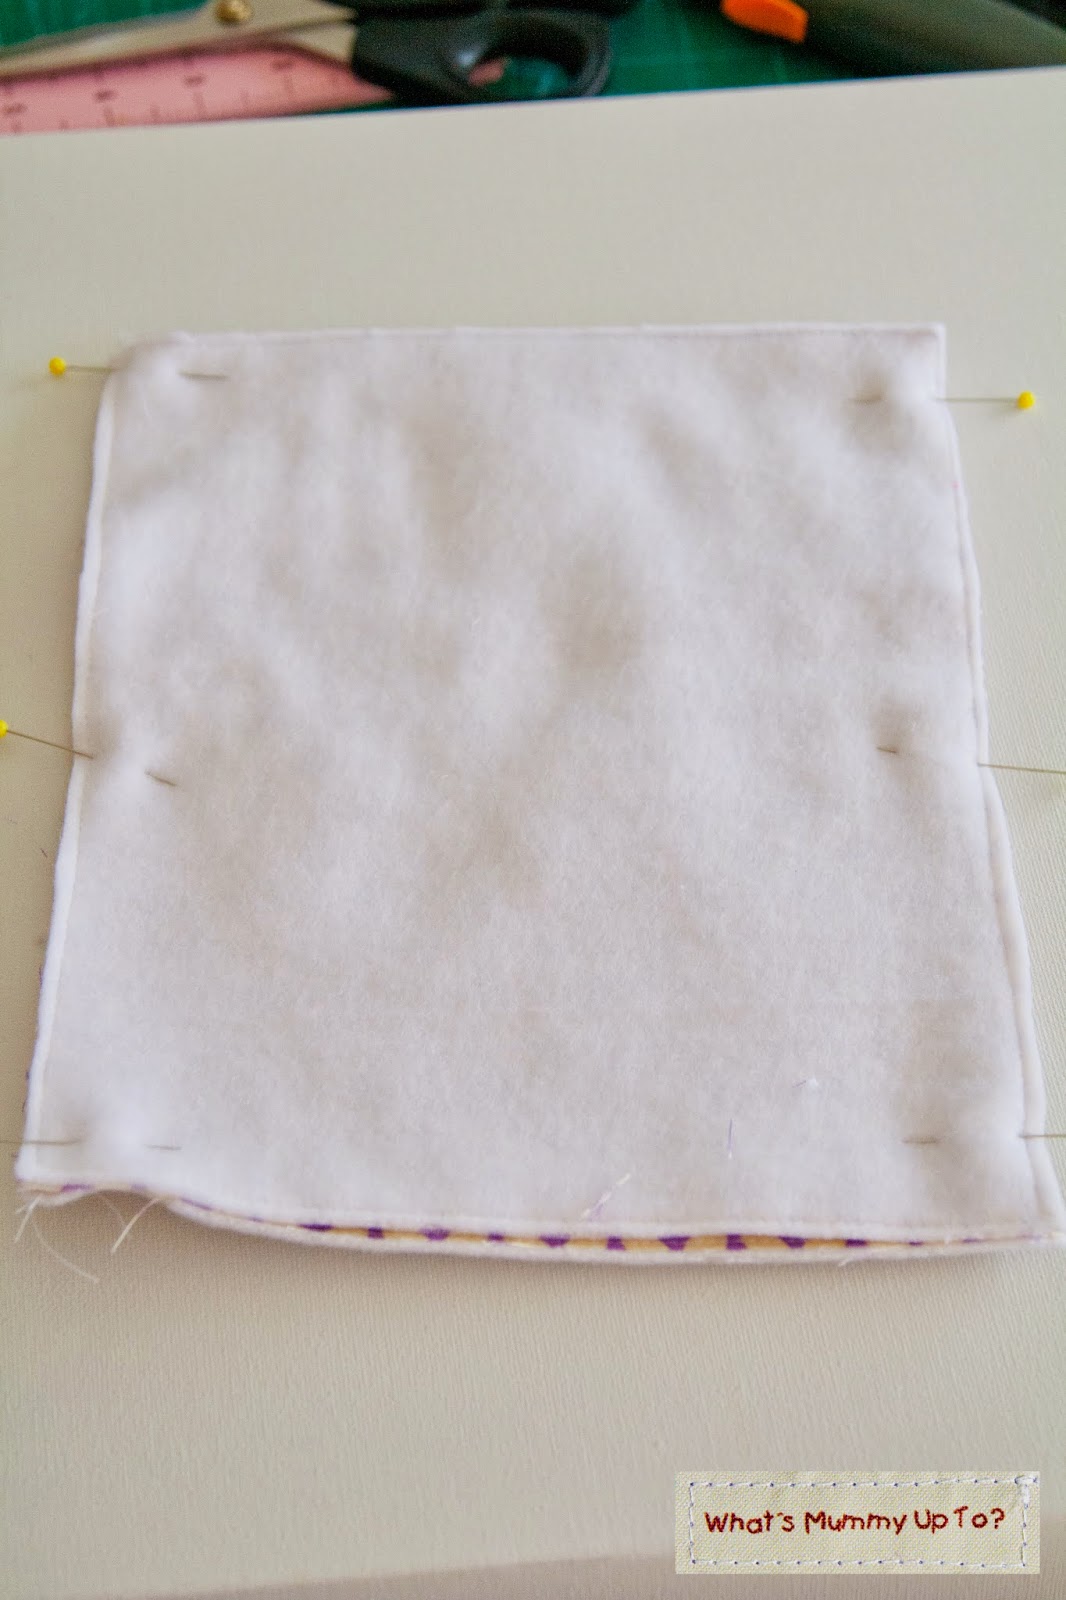 What's Mummy Up To ...: Tutorial - Envelope-style Nappy/Diaper Holder